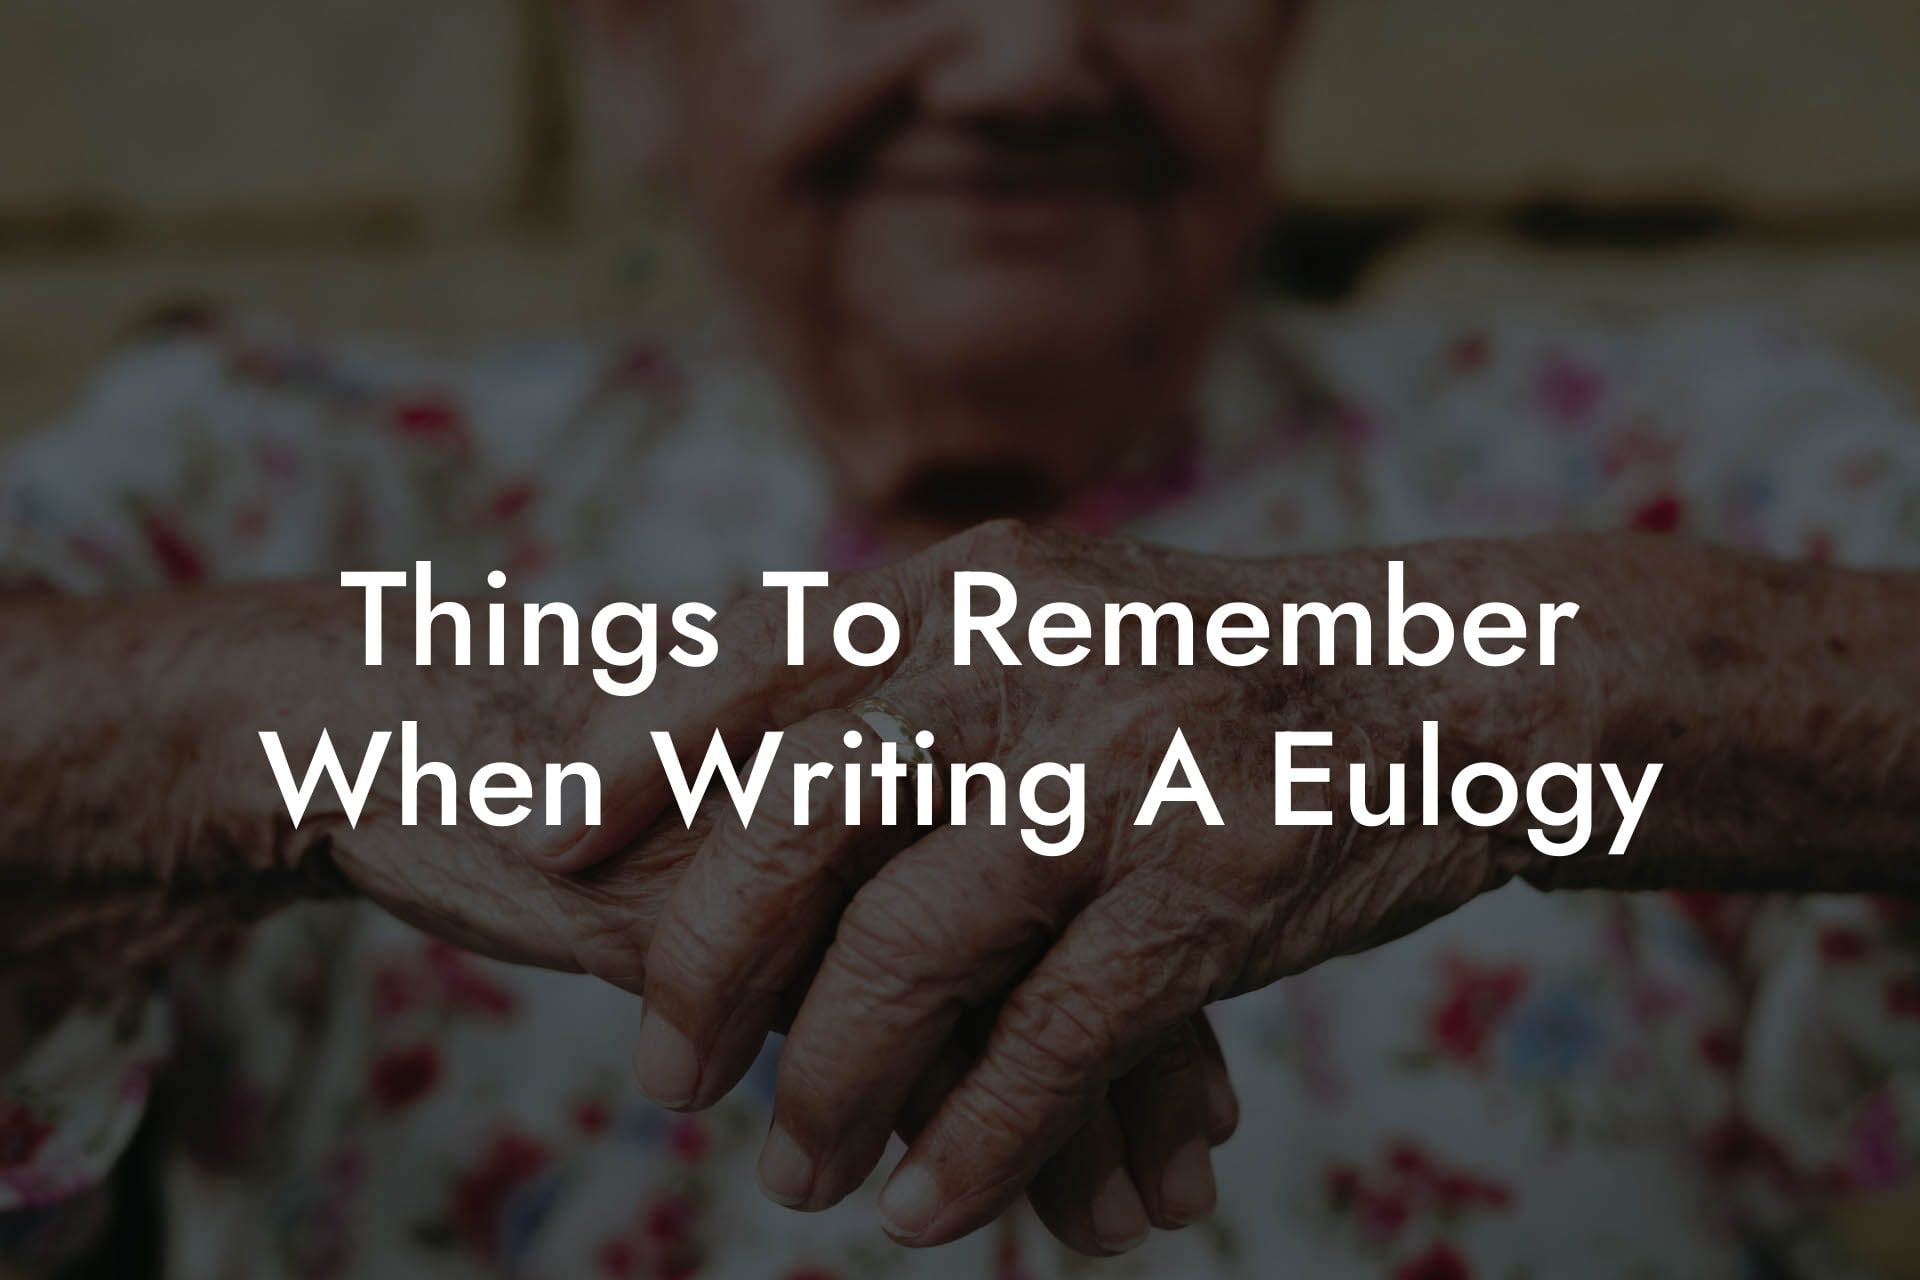 Things To Remember When Writing A Eulogy